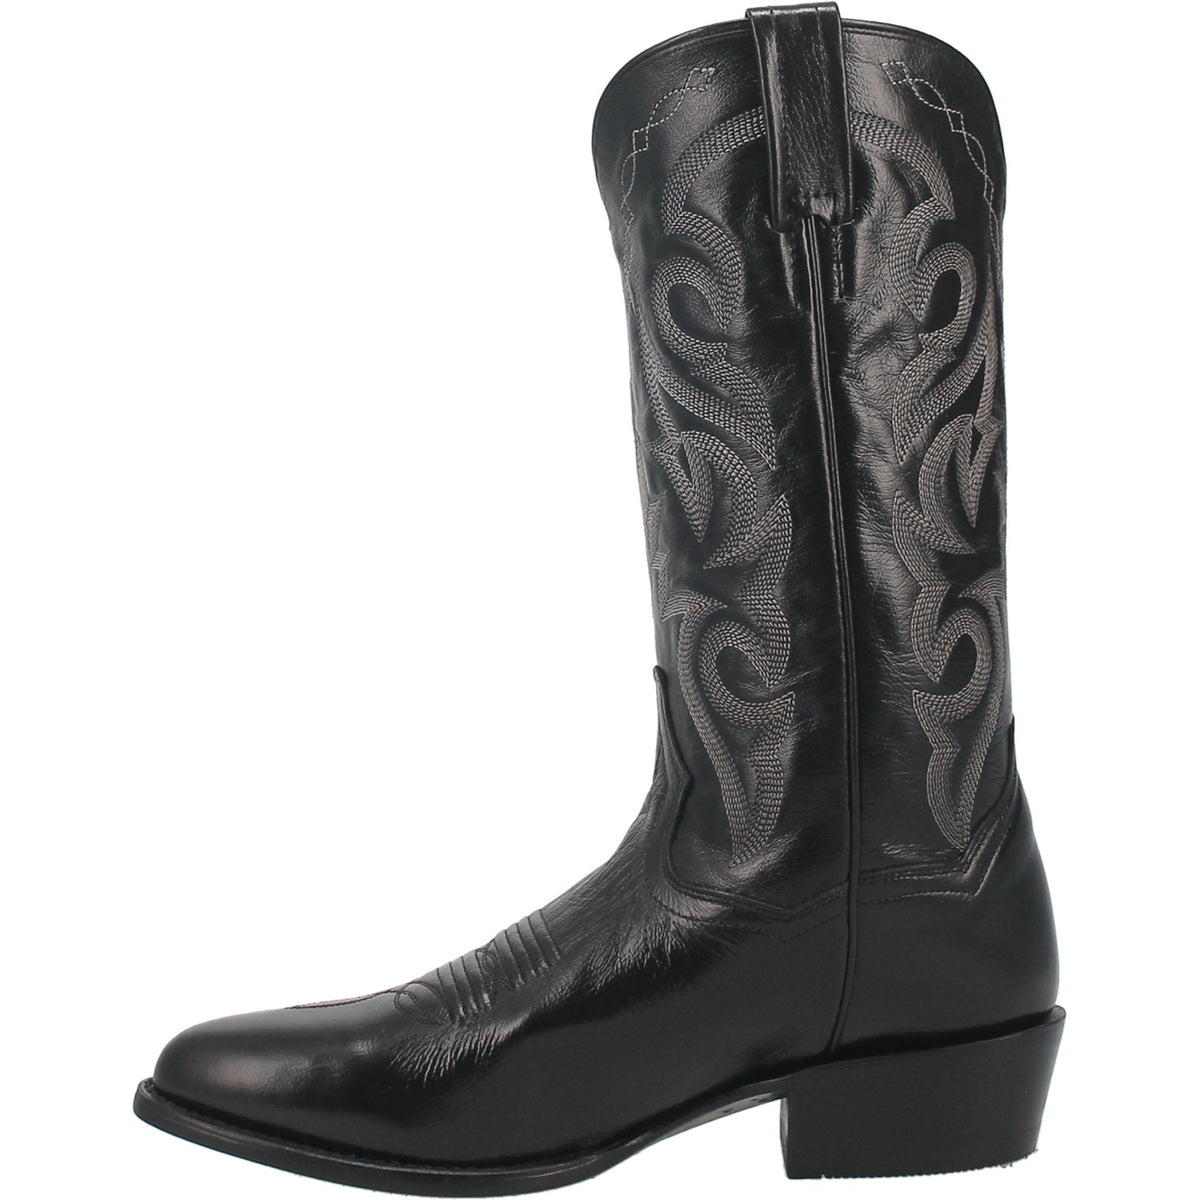 MILWAUKEE LEATHER BOOT R TOE Cover